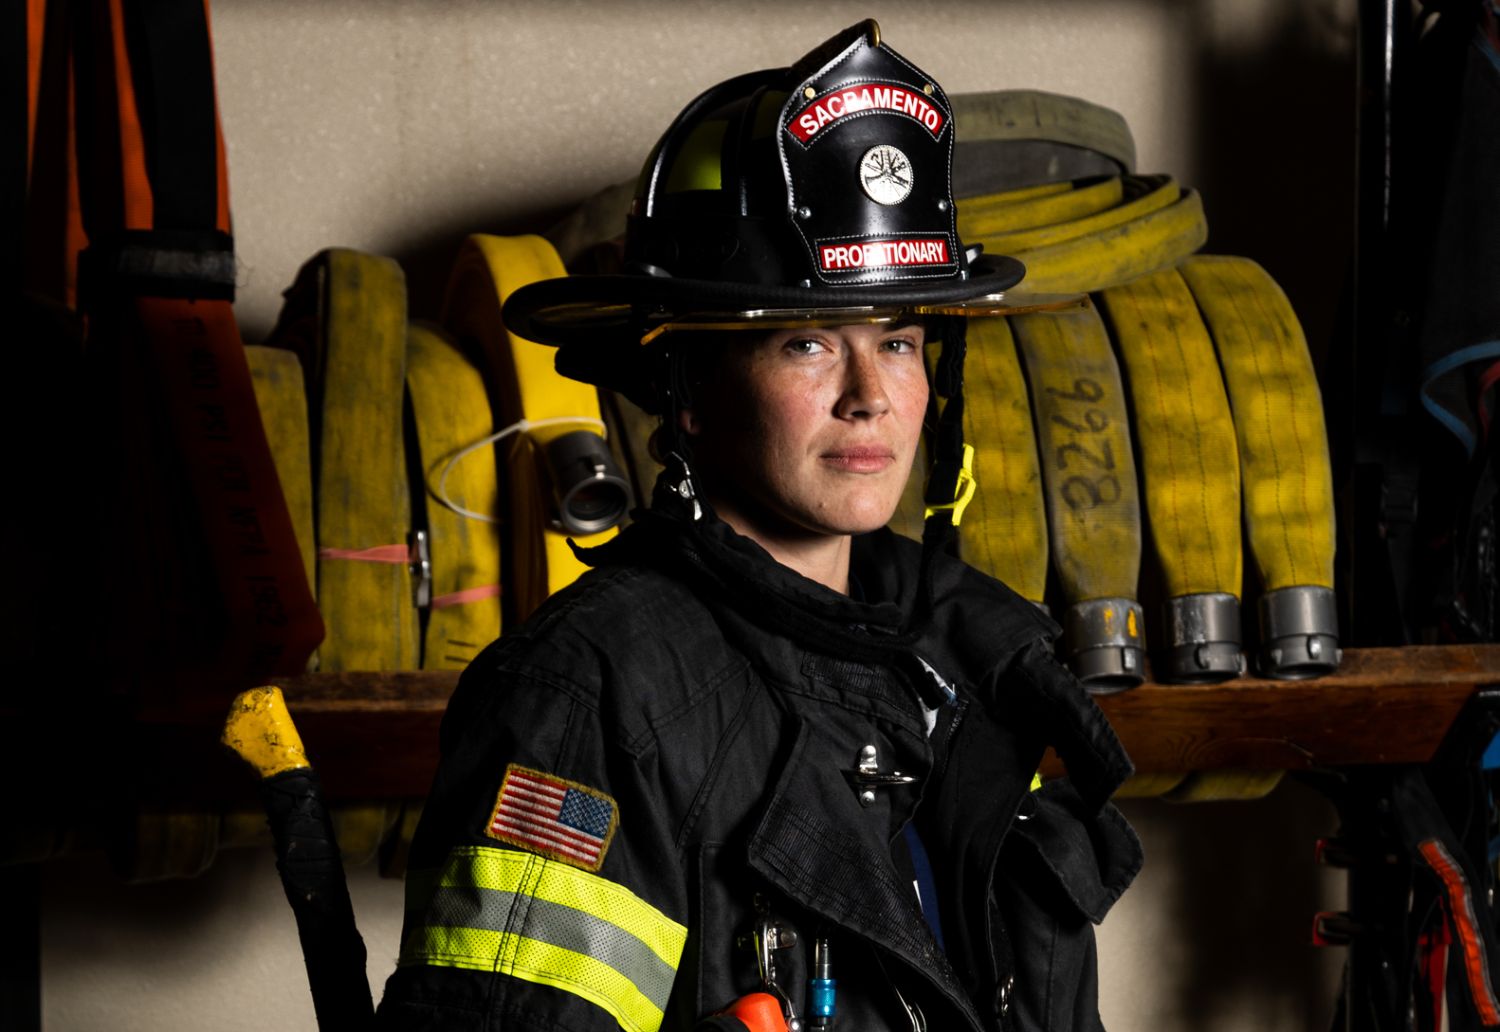 photo of a firefighter in full uniform with helmet that reads Sacramento Probationary. Yellow hose in the background. 